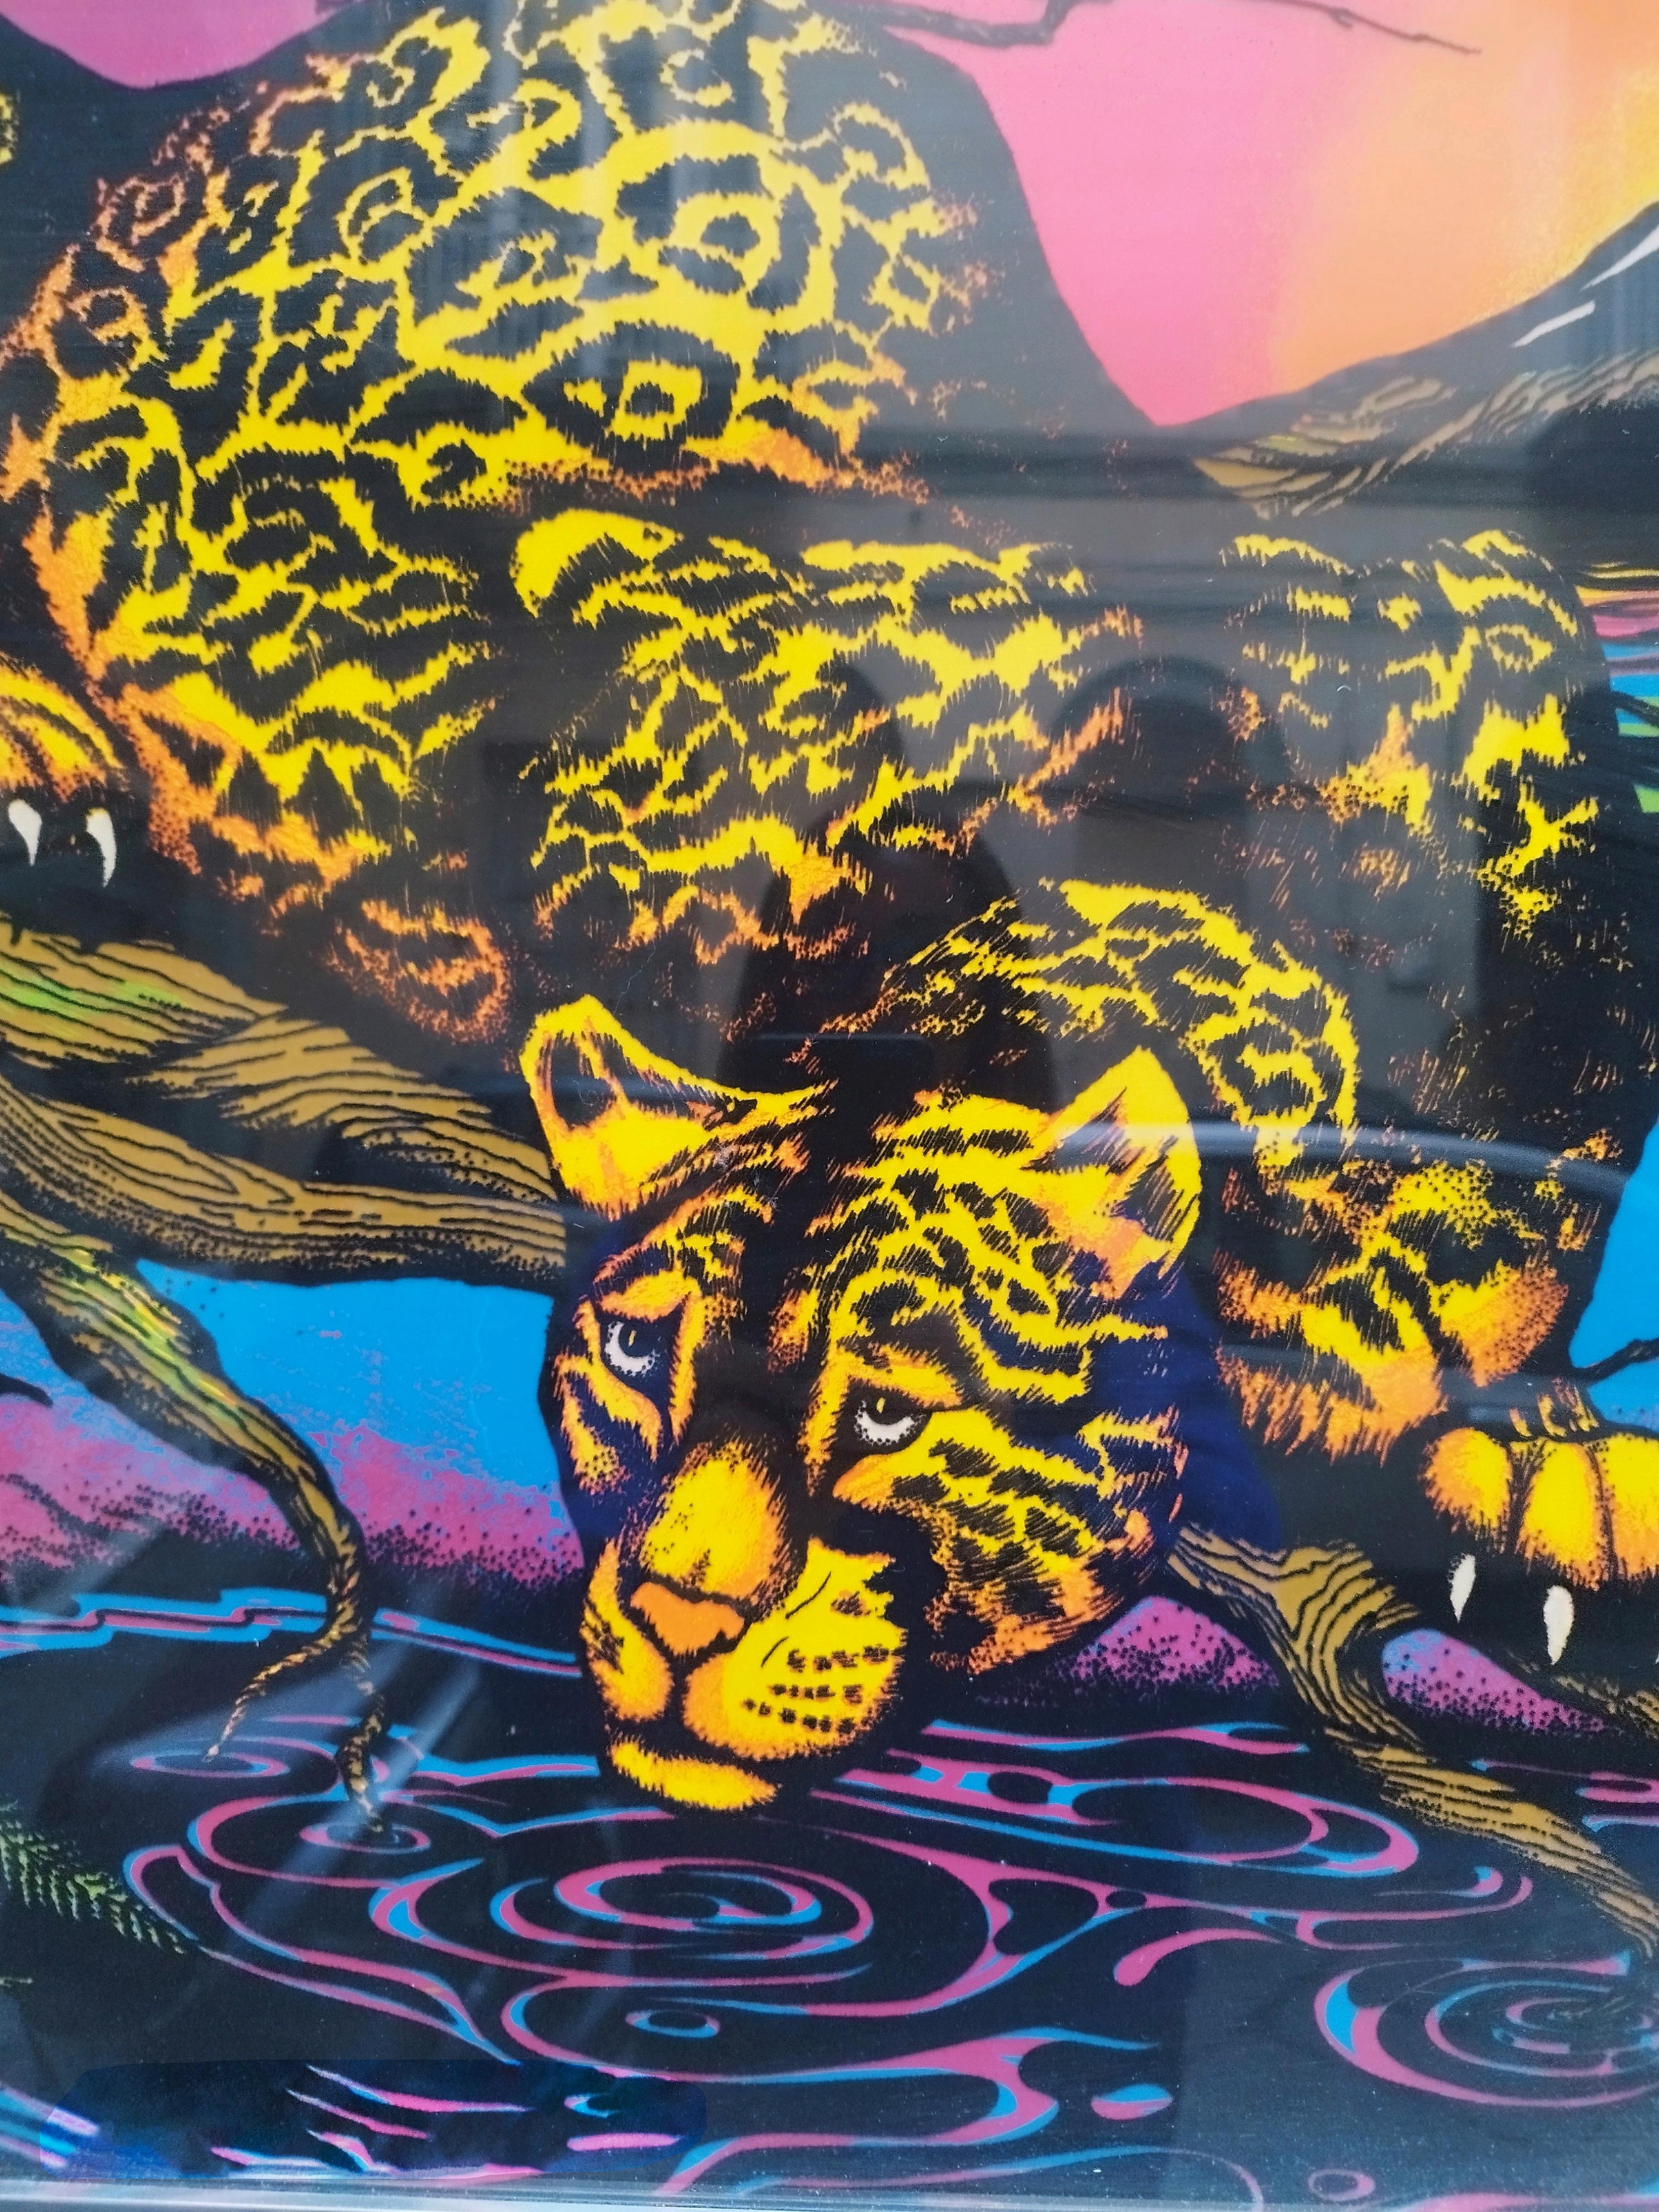 An original black light, silkscreen and lithograph poster from the 1970s published by AA Sales inc. from Seattle, Washington. The poster depicts a jaguar resting on a tree branch reaching out and diving into a tranquil lake. His eyes seem fixed in a